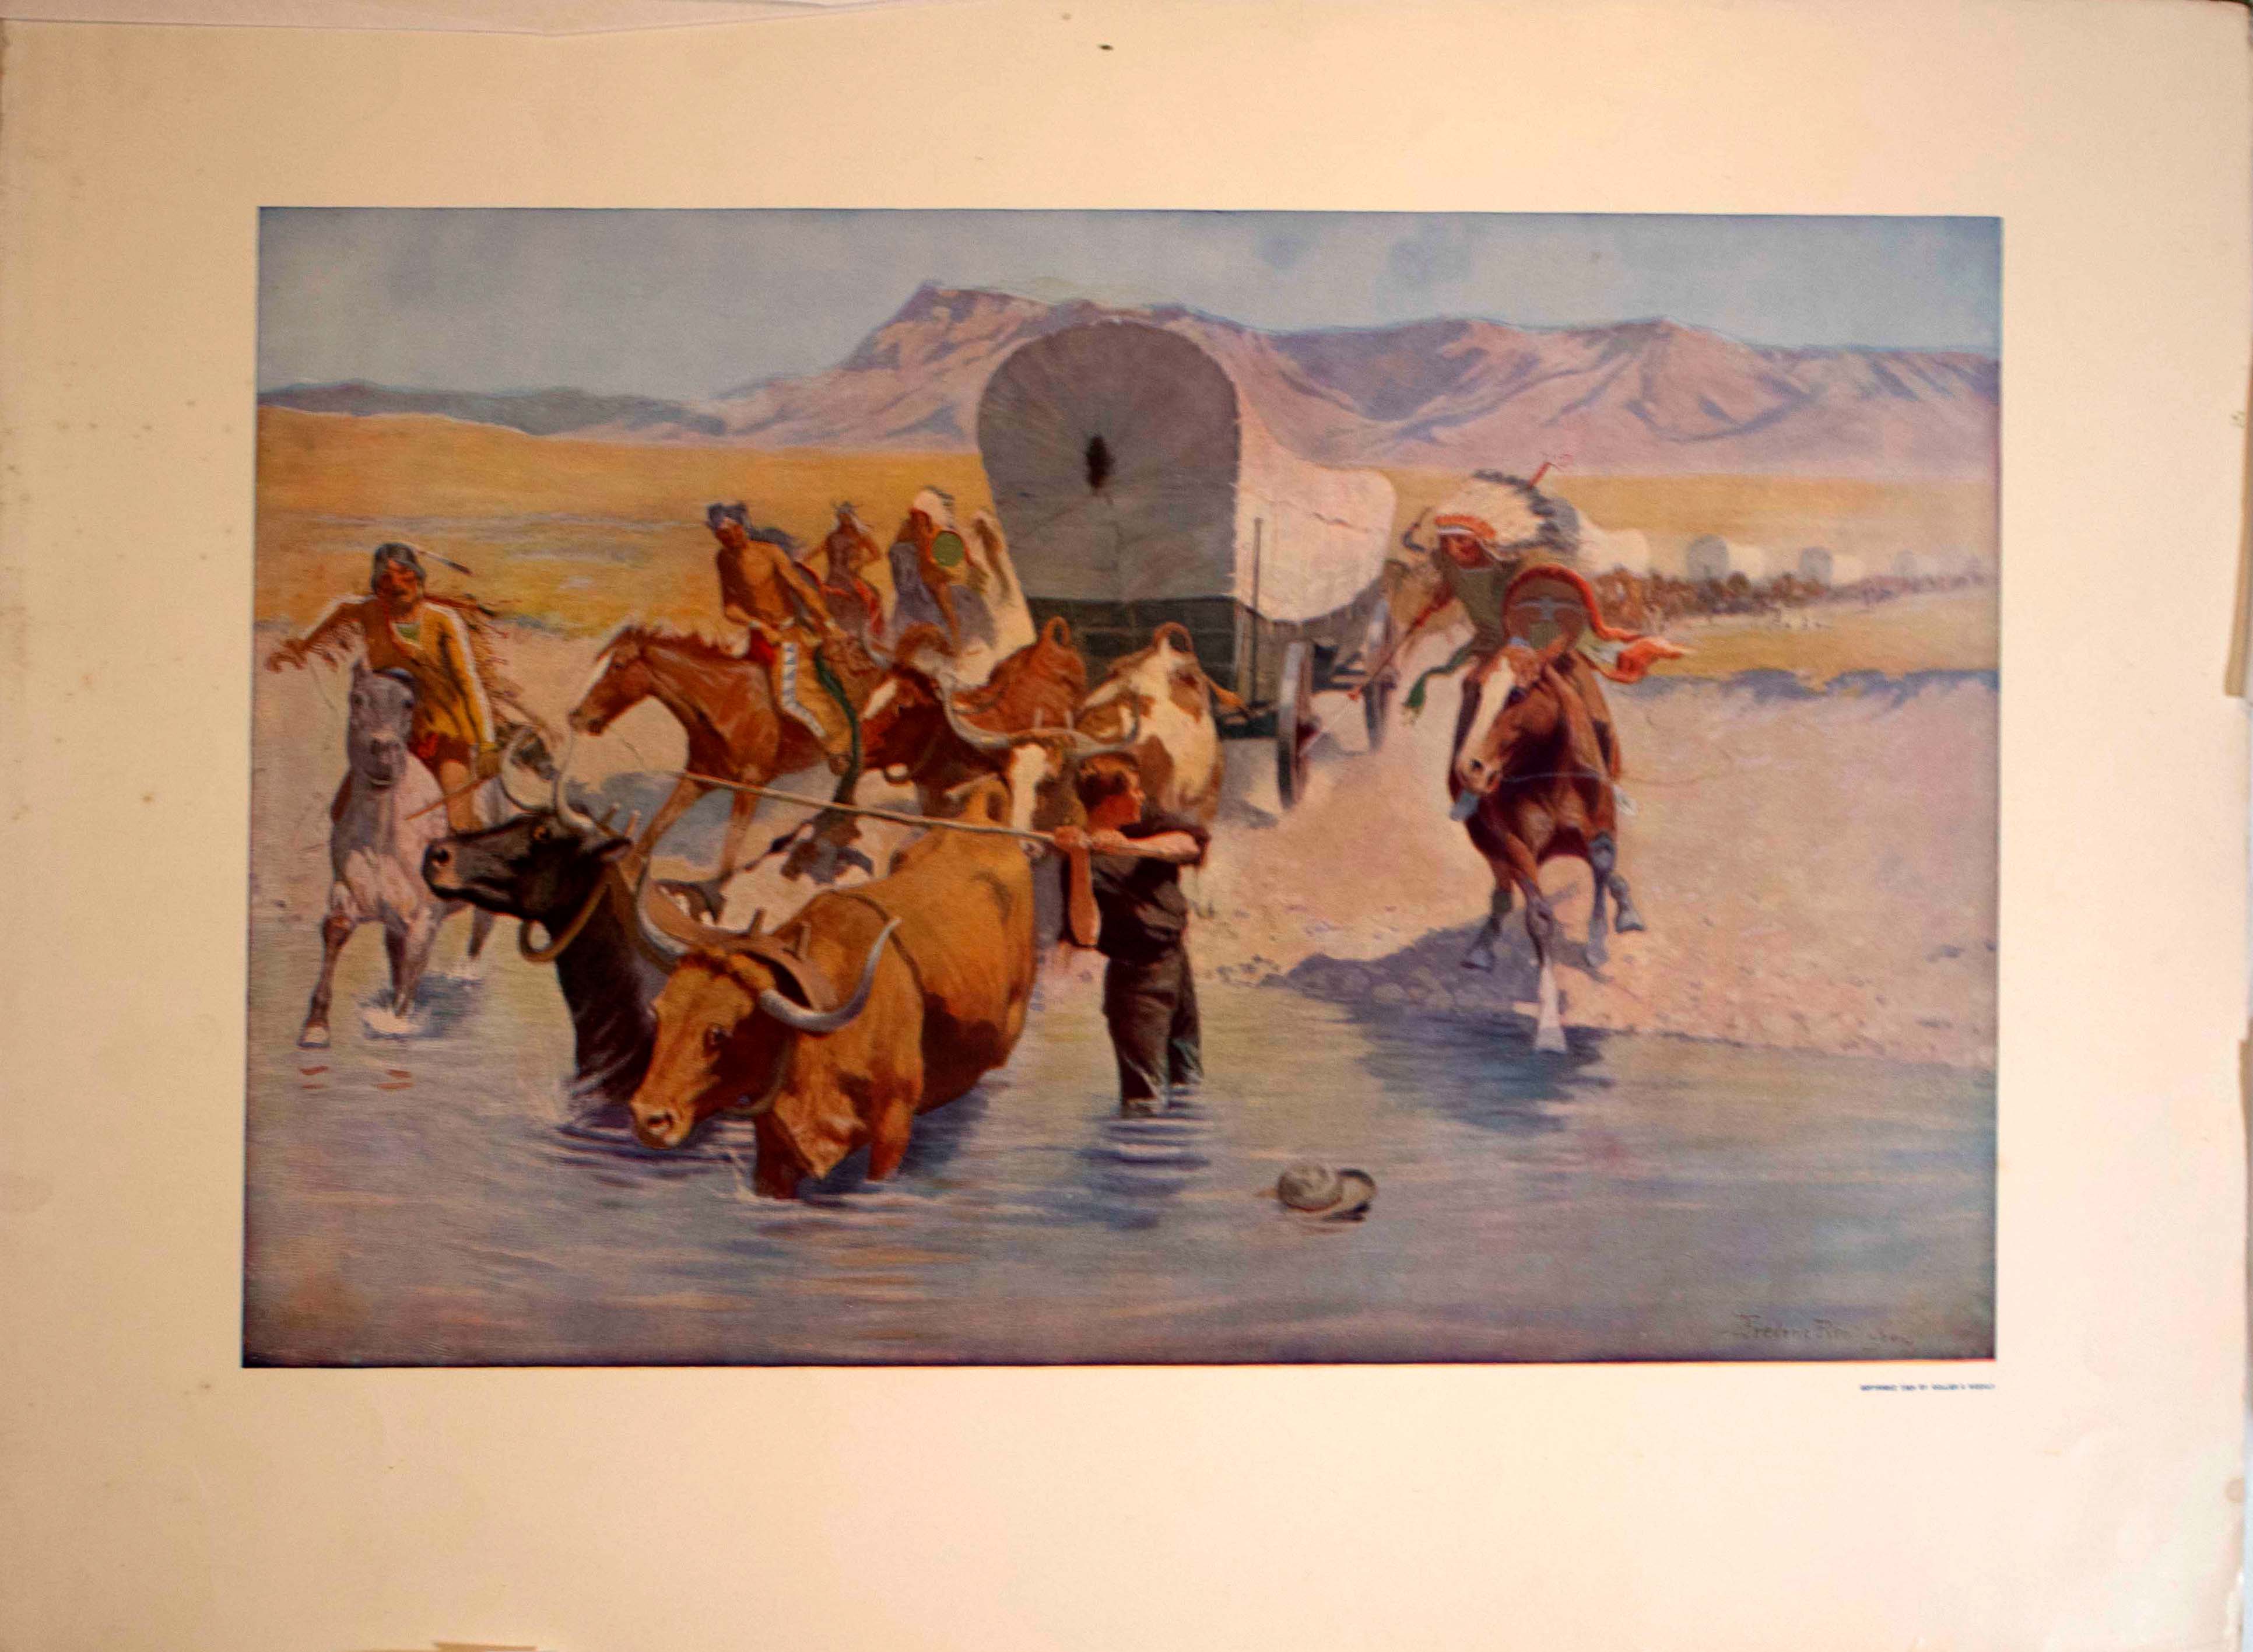 For your consideration is a historical set of artworks depicting the old west by Frederic Remington. Dimensions: 23.5h x 18w (unframed). In excellent condition.
 